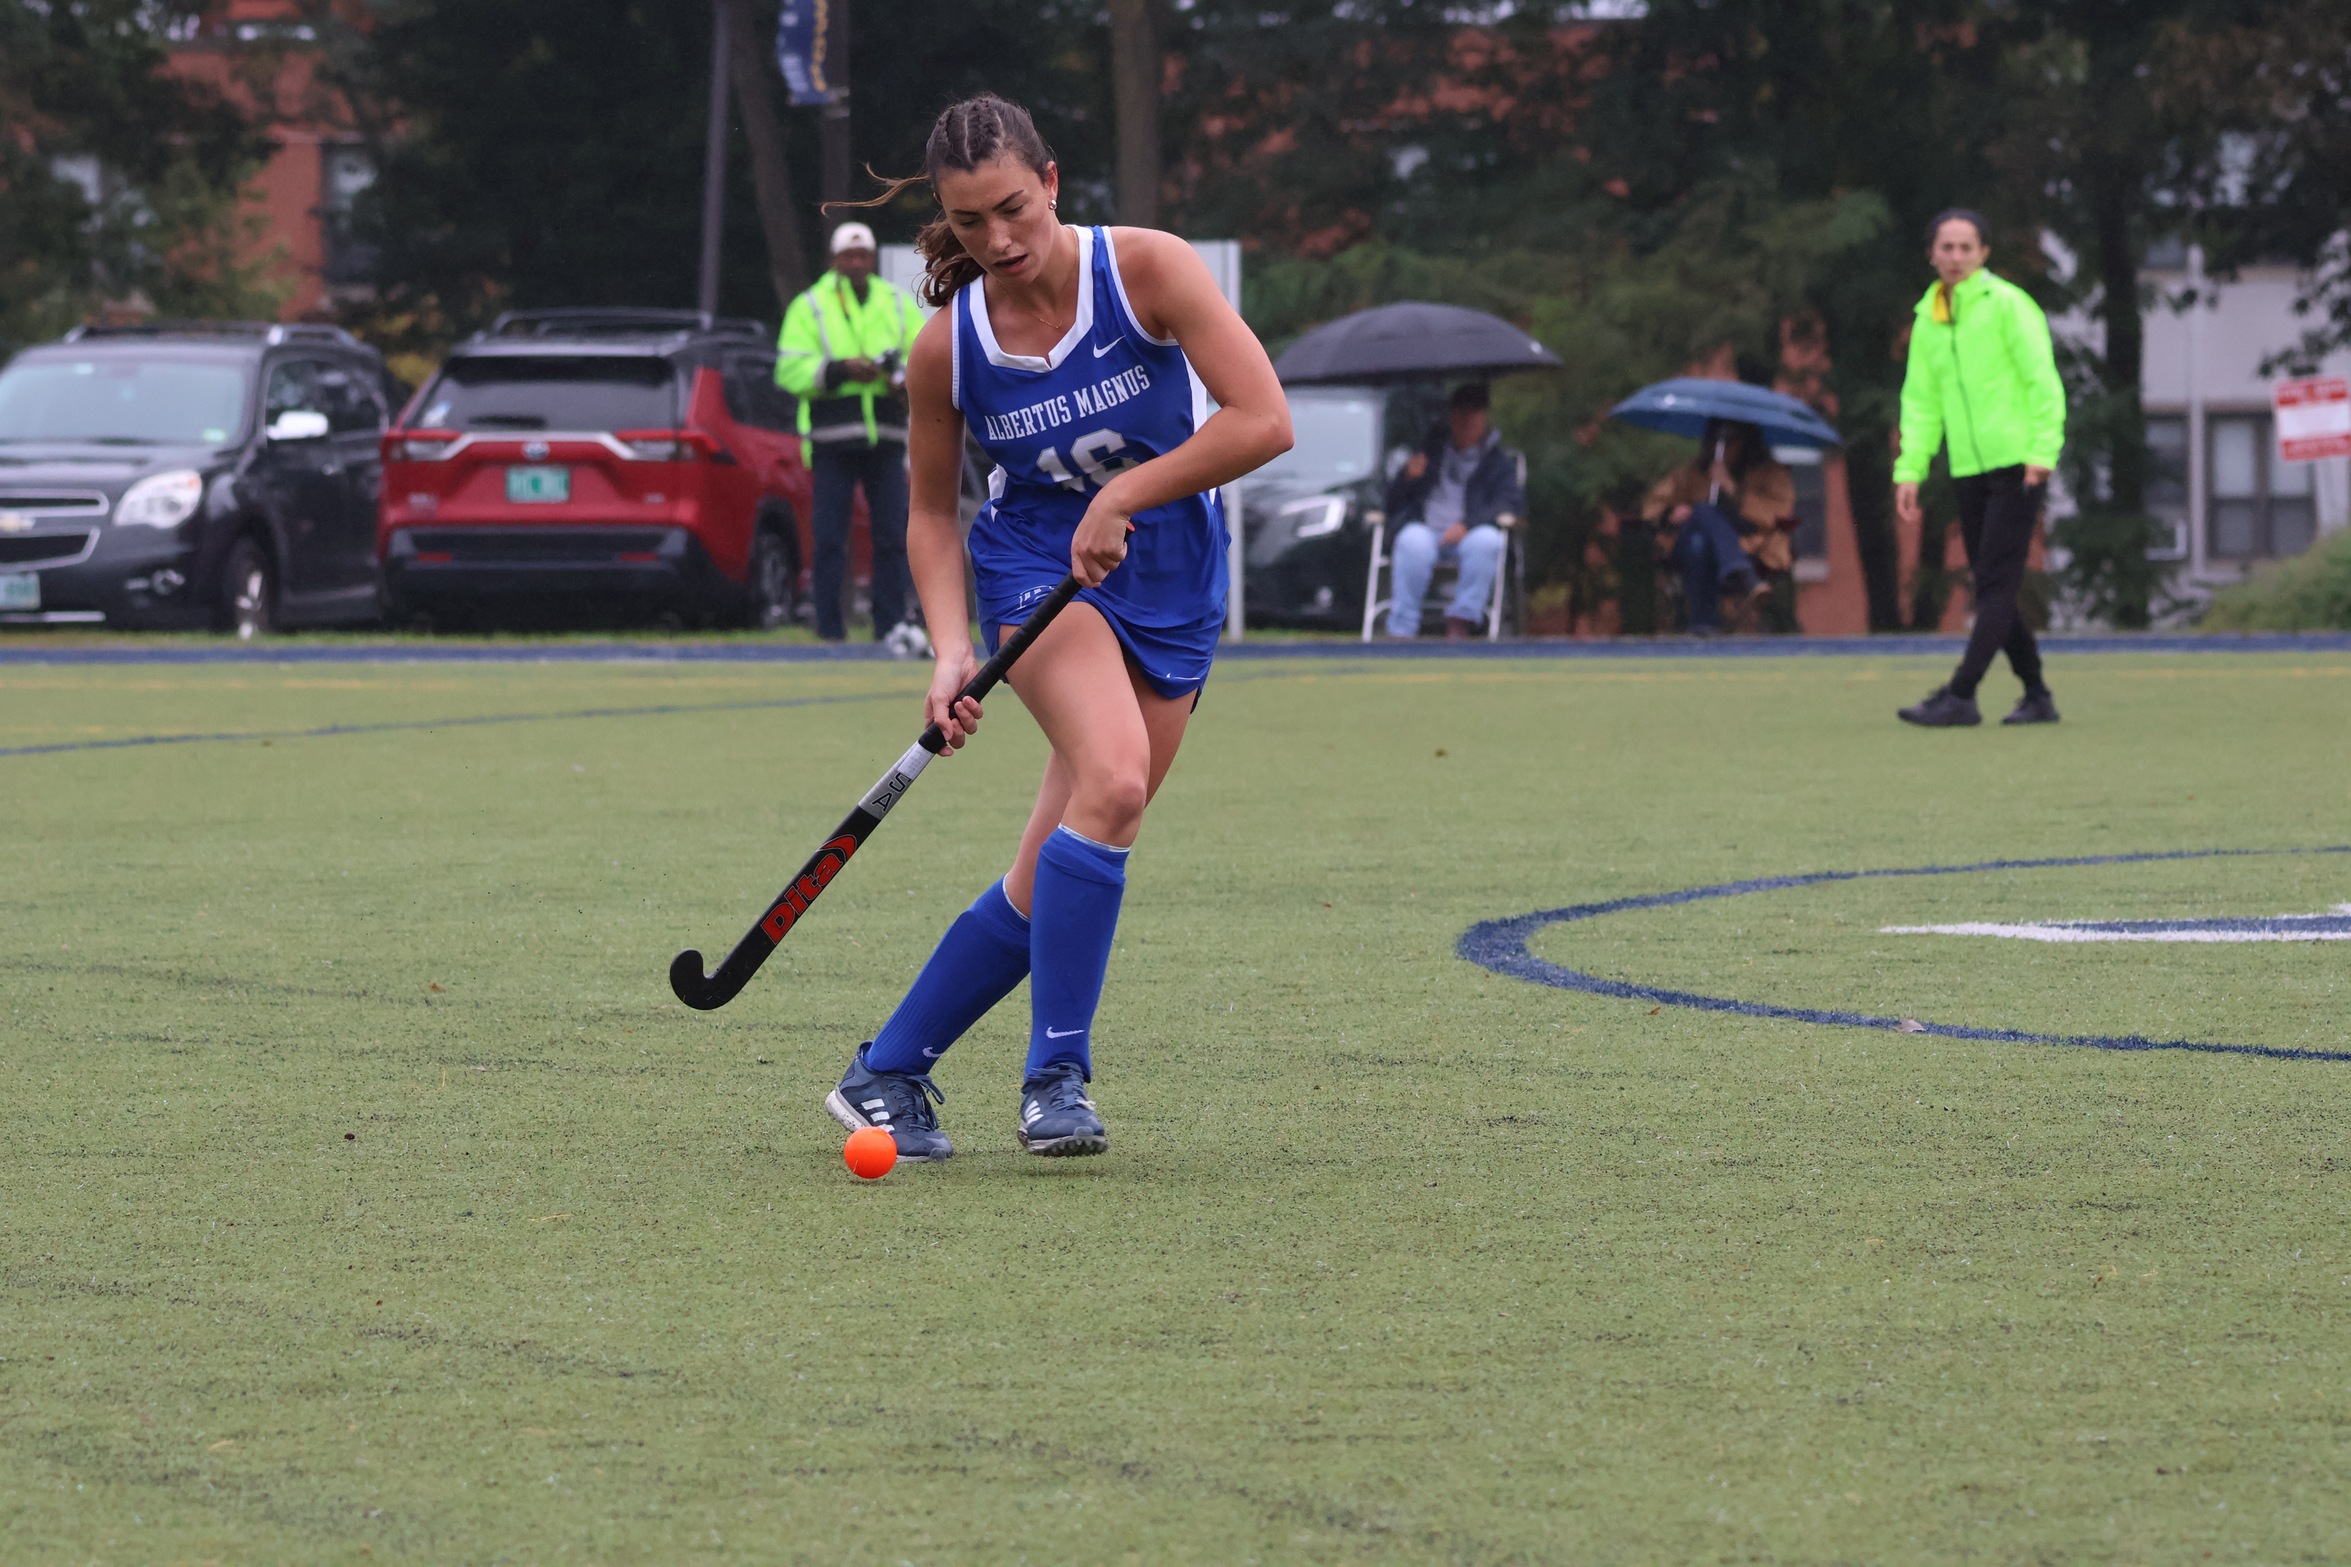 Tough Second Half For Field Hockey Results In Loss To Rivier